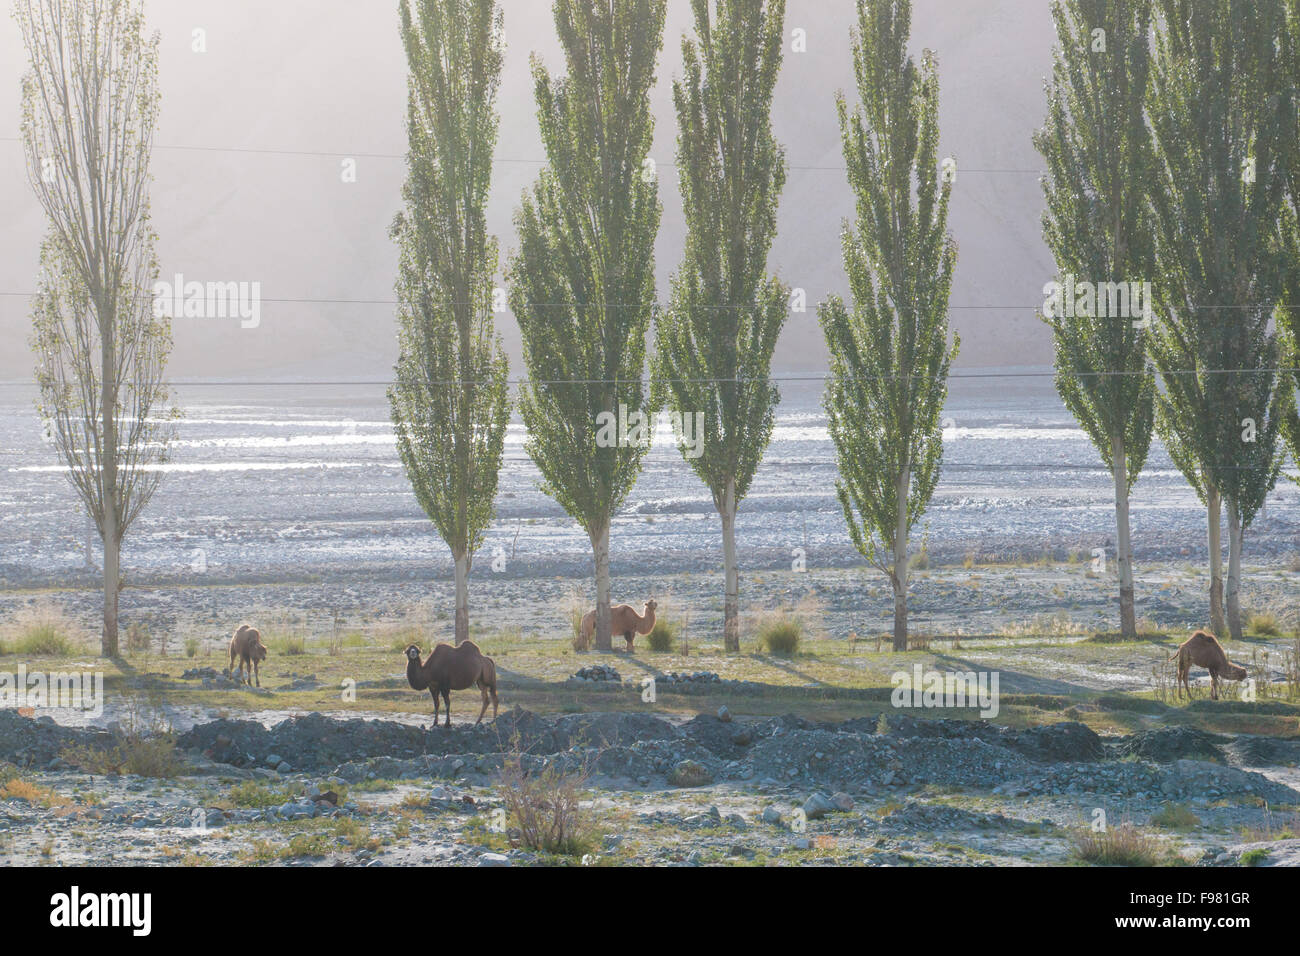 Wild camels in mountain valley with trees in Xinjiang China Stock Photo